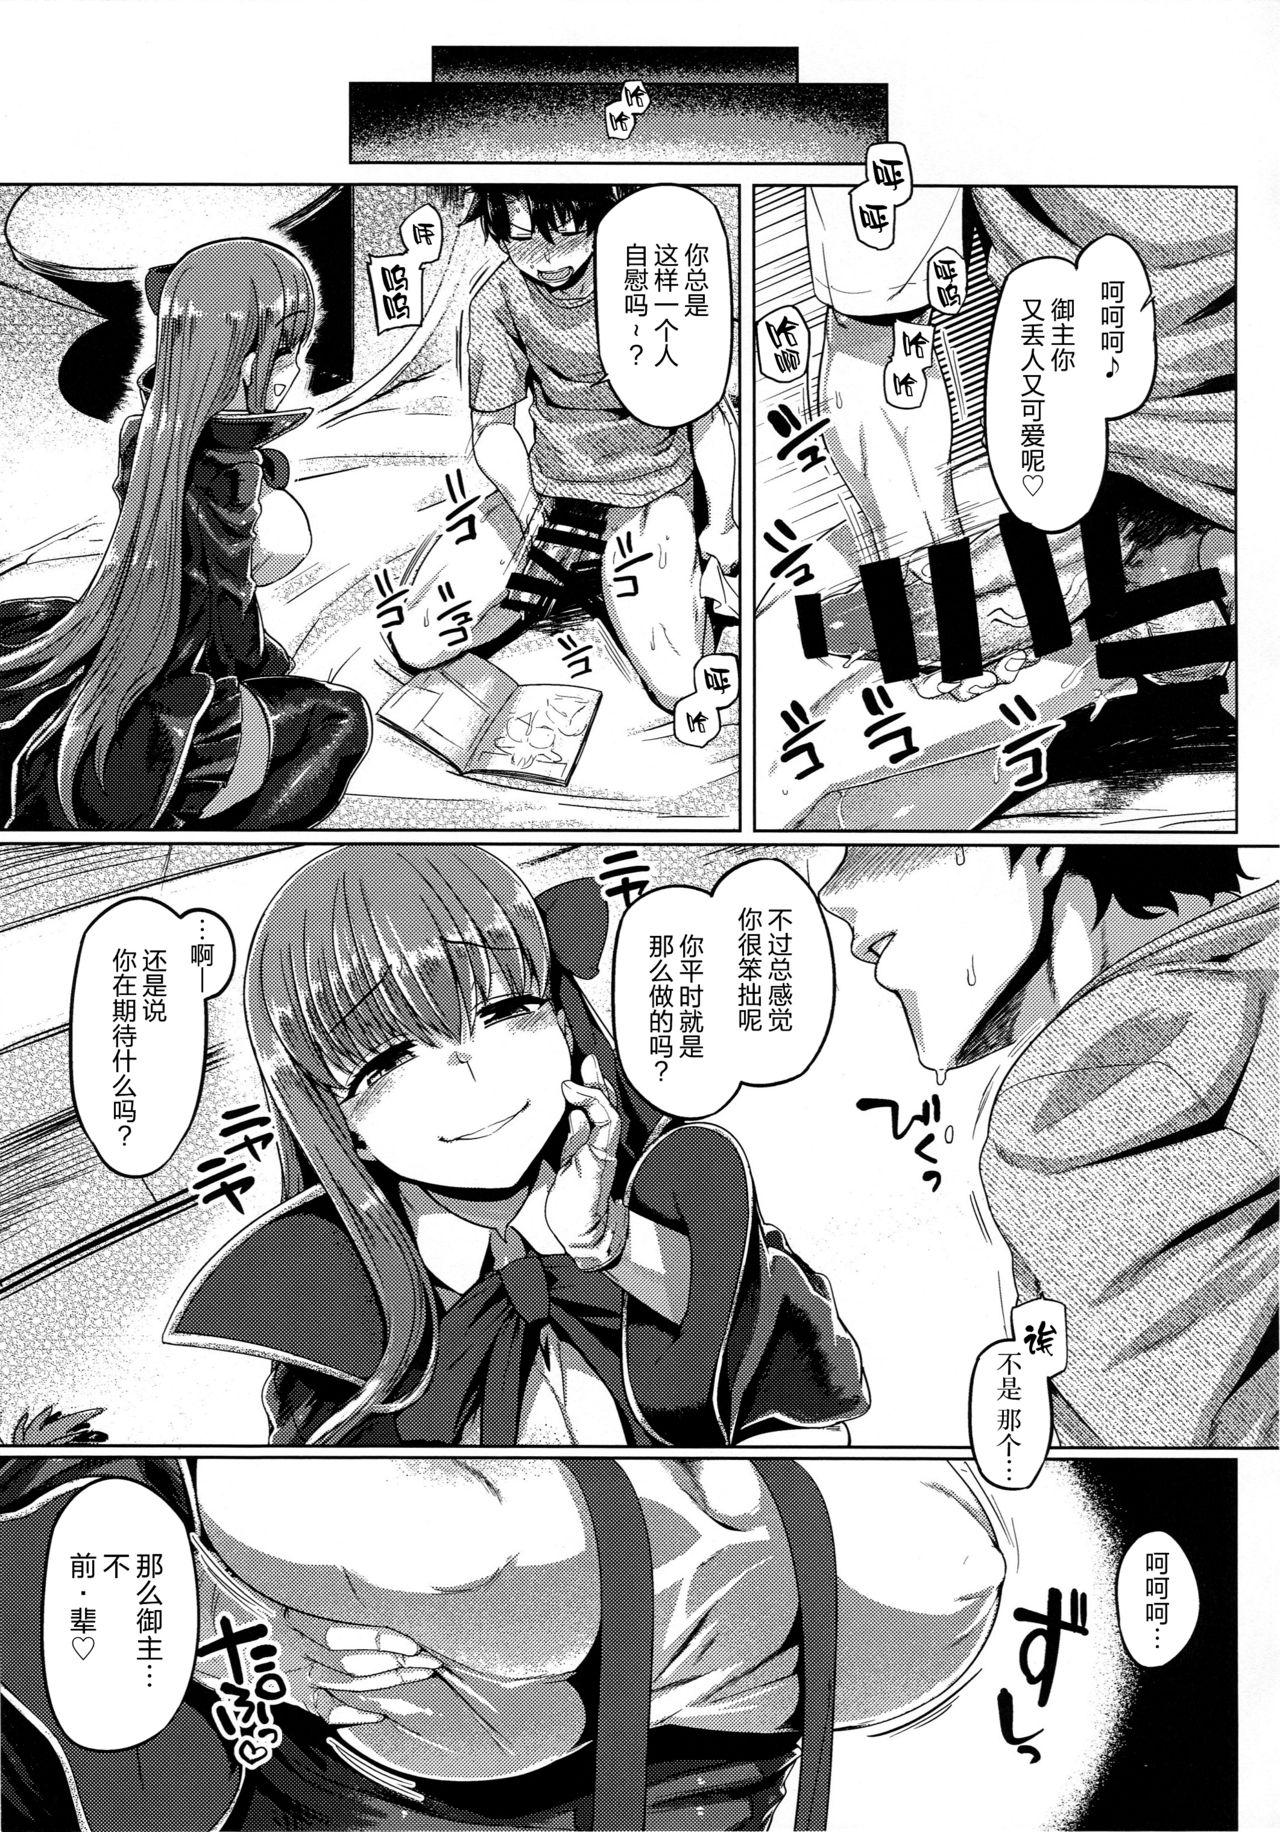 Tributo BB-chan to Neru - Fate grand order Dance - Page 6